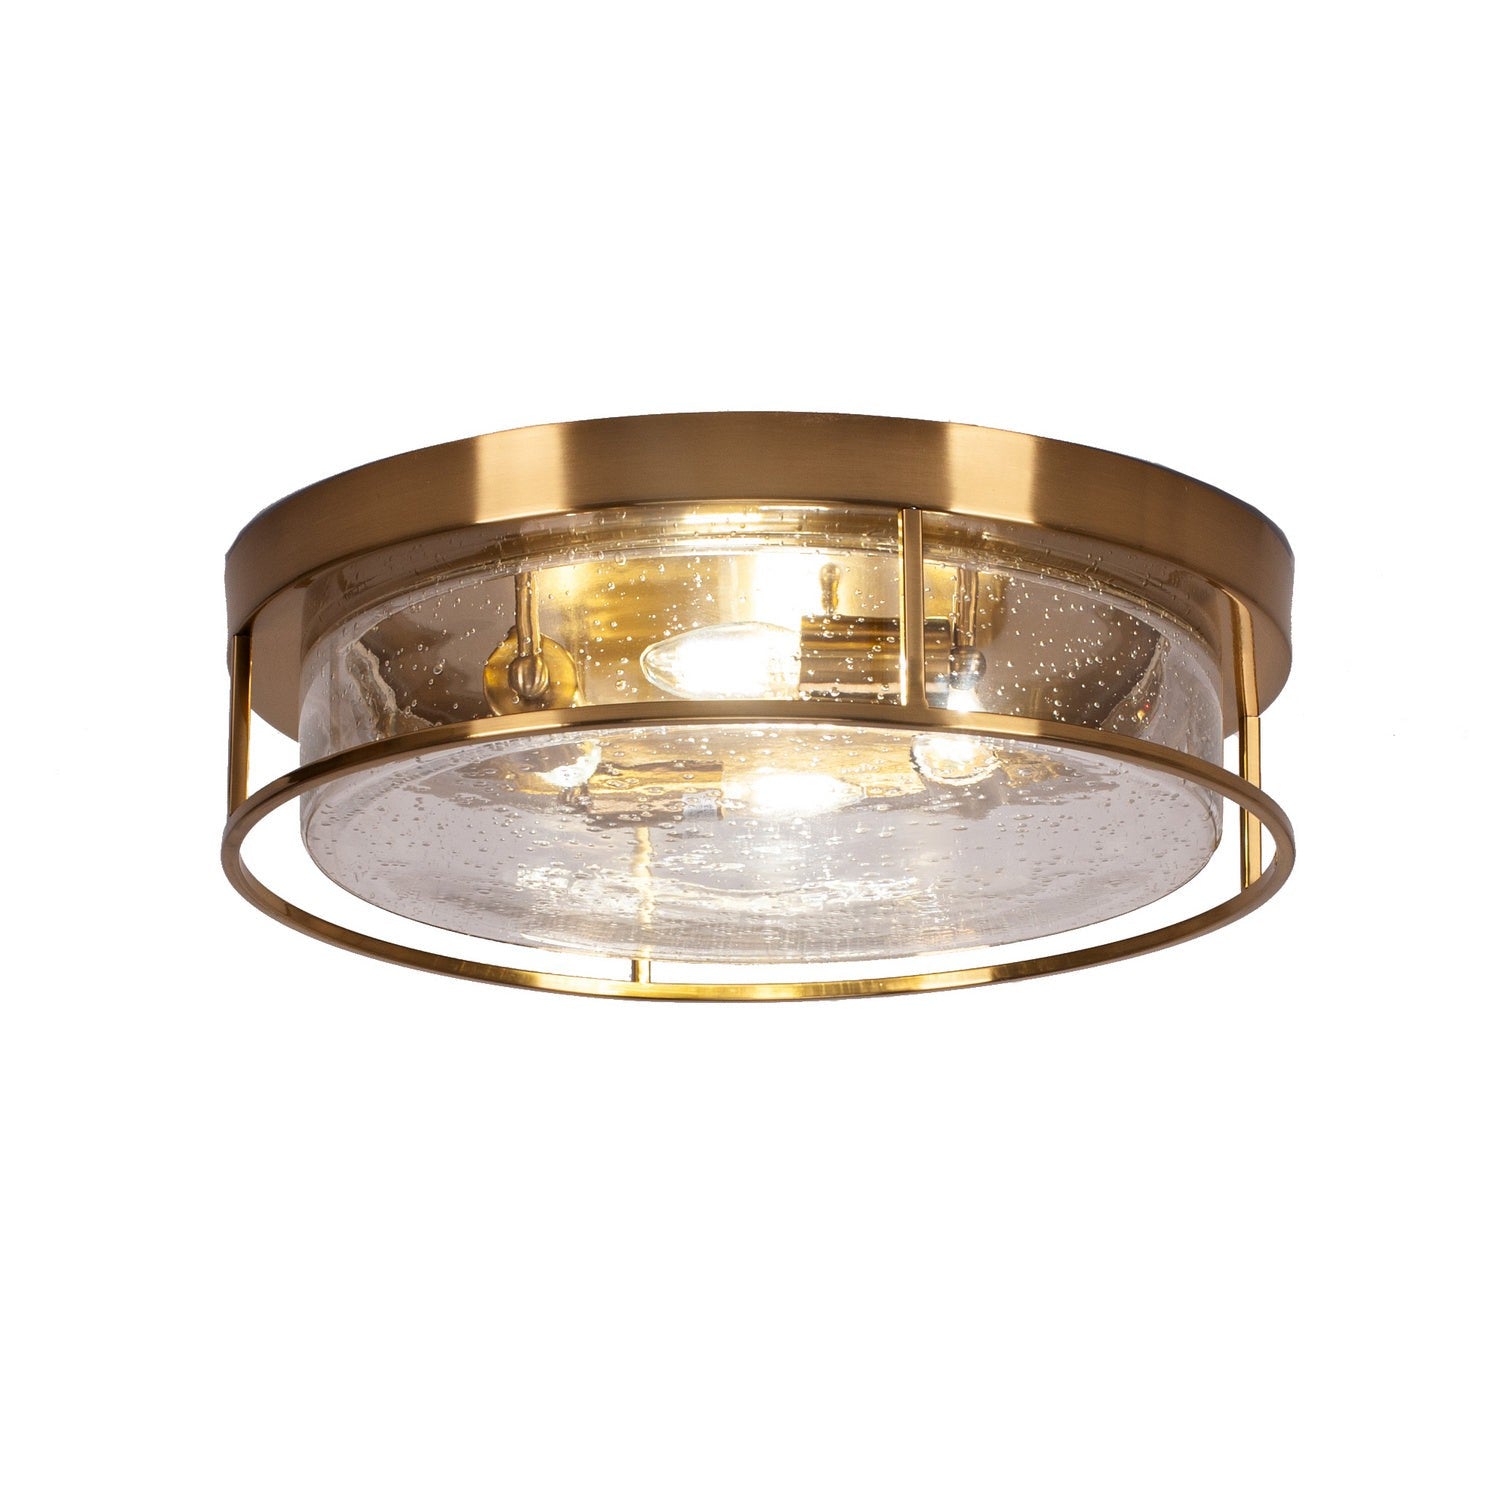 Toltec Any 818-nab-0 Ceiling Light - New Age Brass